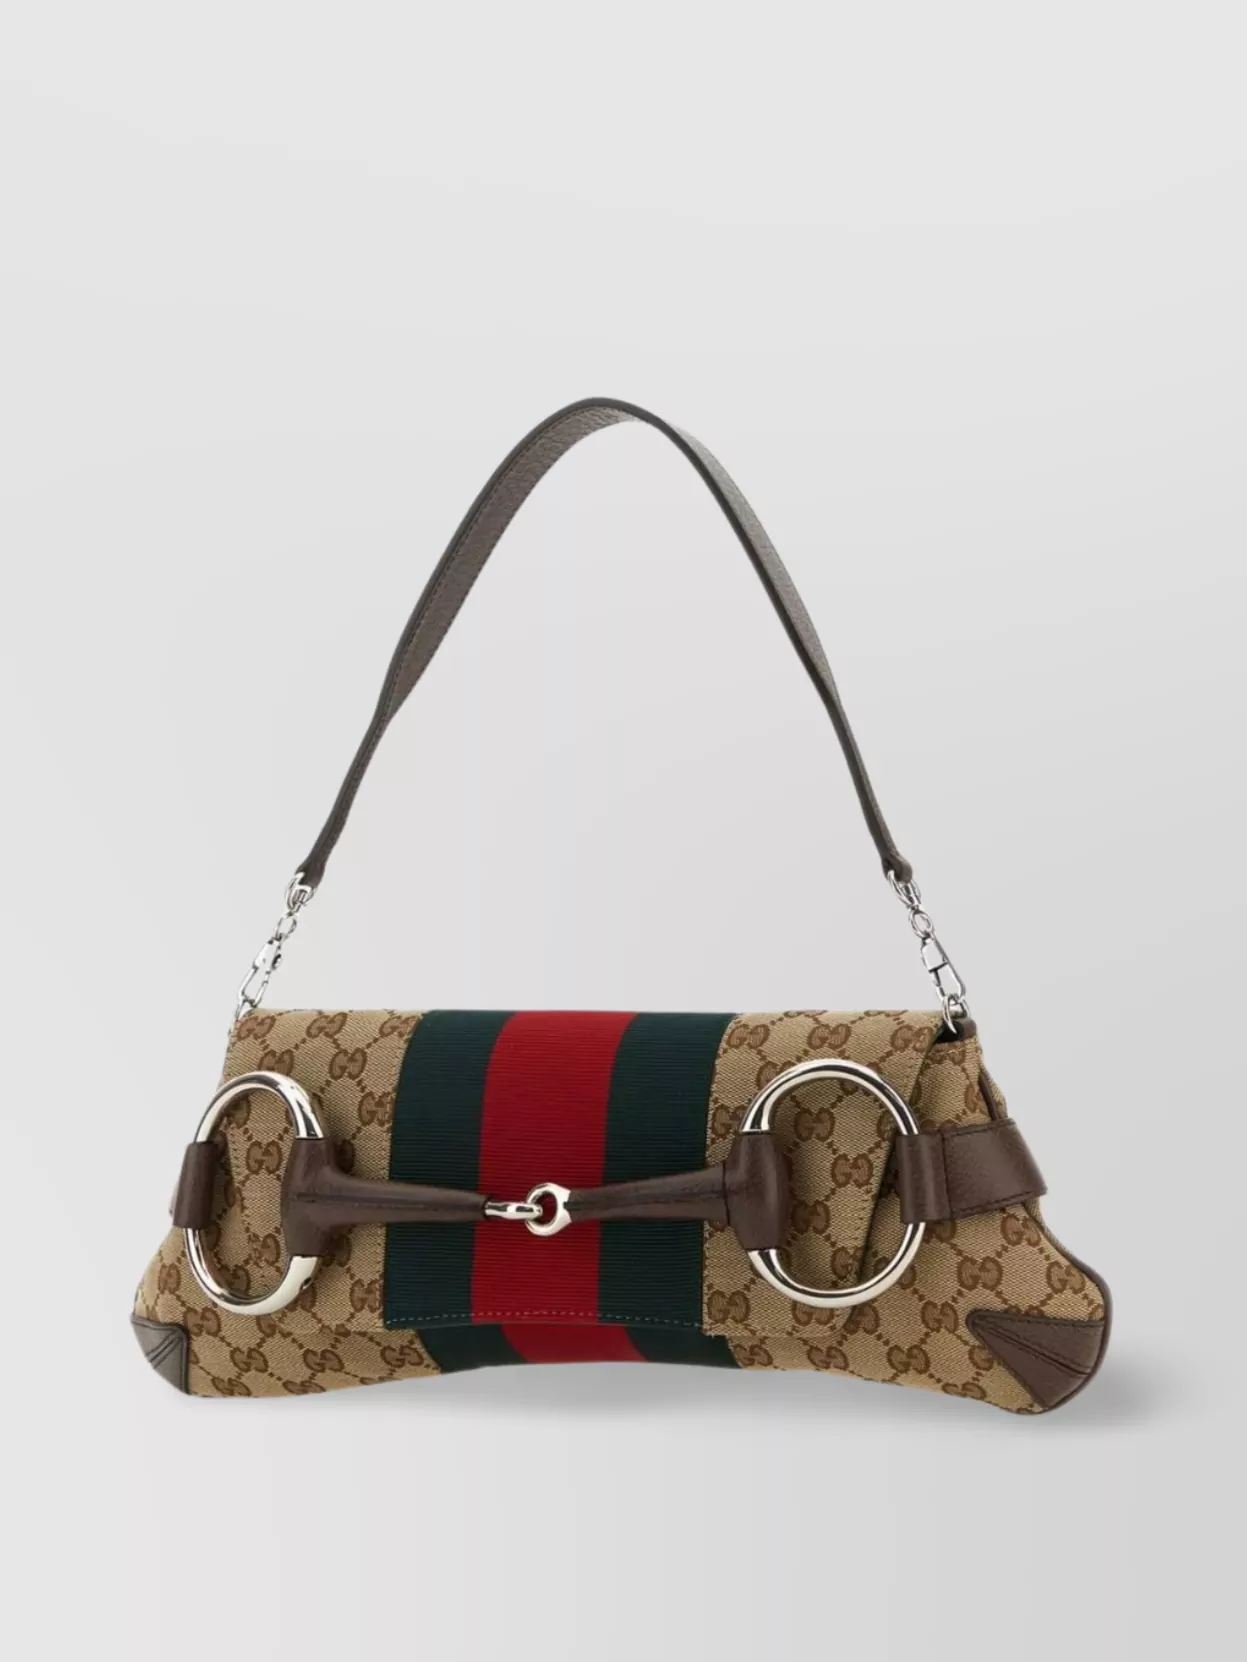 Gucci Gg Supreme Fabric And Leather Medium Horsebit Chain Shoulder Bag In Brown